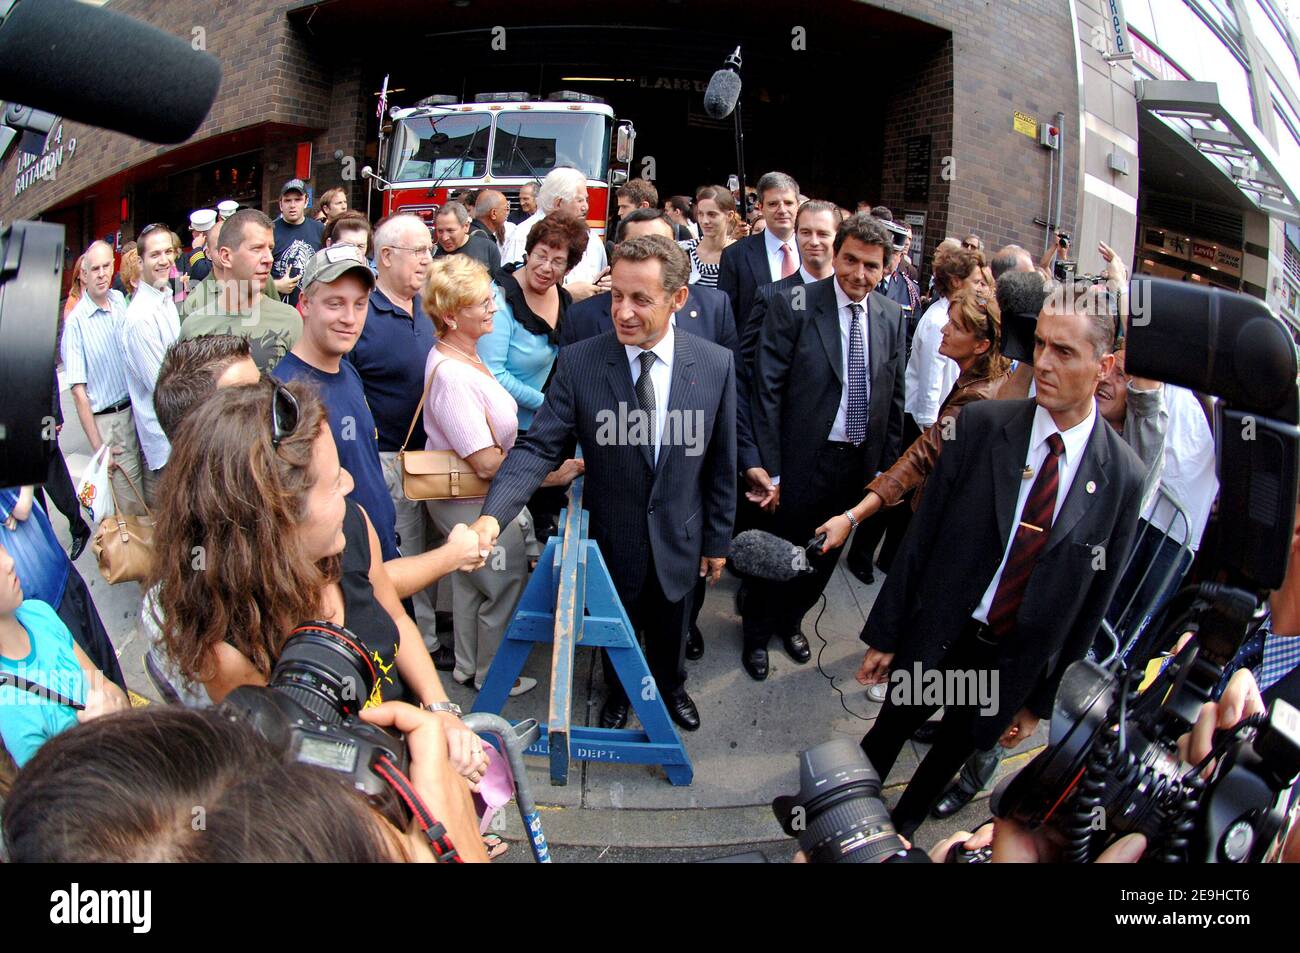 French interior minister Nicolas Sarkozy presents the Medal of Honor of french firefighters to FDNY, in New York City, NY, USA, on September 10, 2006. Photo by Lionel Hahn/ABACAPRESS.COM Stock Photo